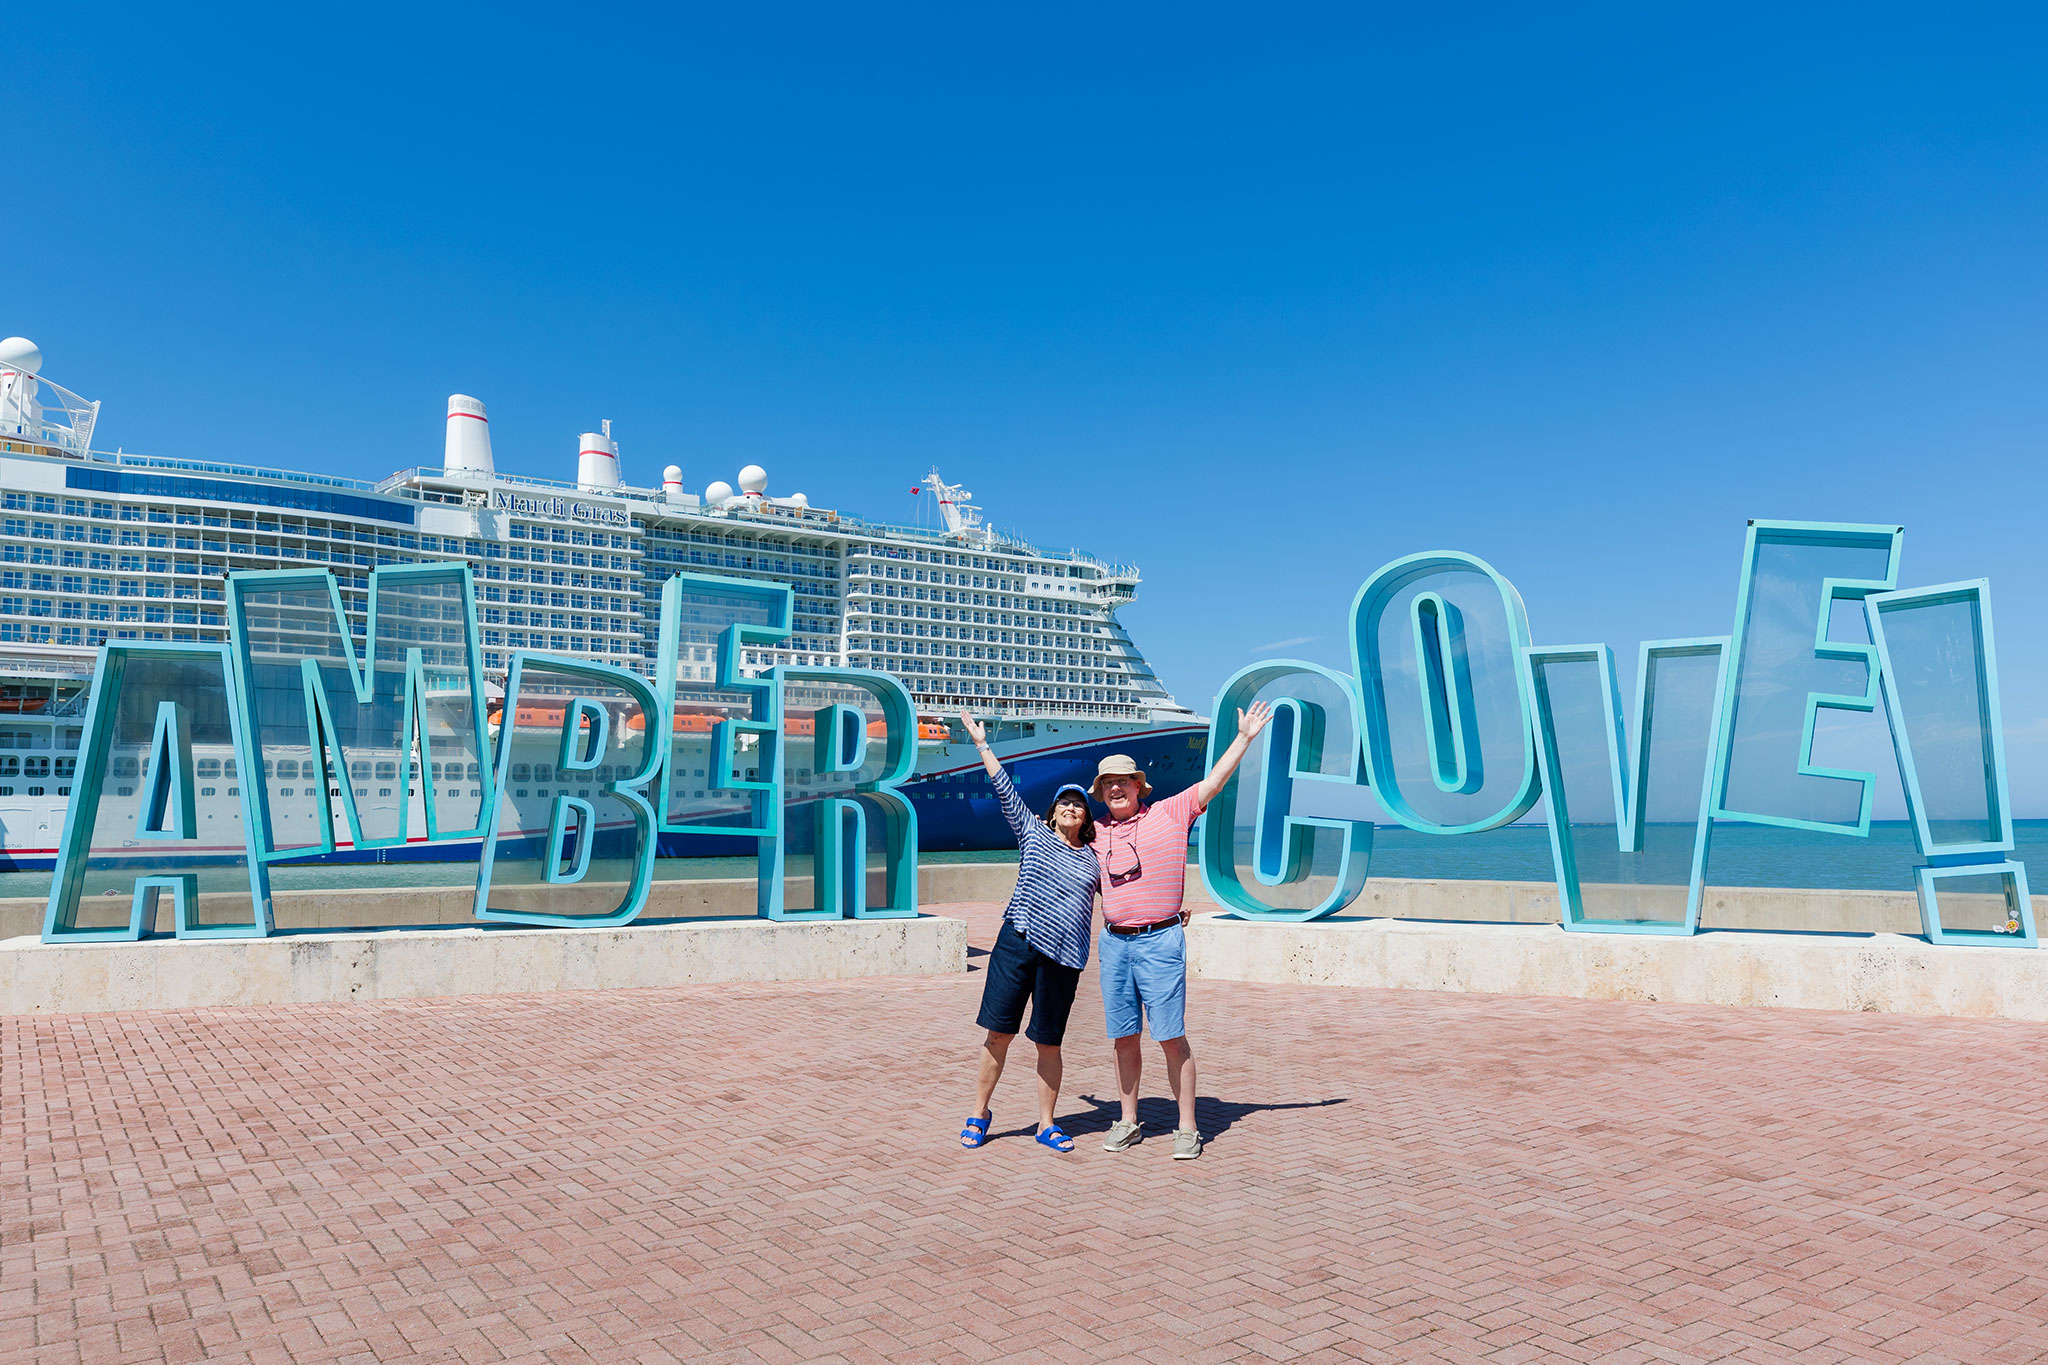 A joyful middle-aged couple posing with raised arms in front of a large “Amber Cove” sign, with a massive cruise ship docked in the background under a clear blue sky.